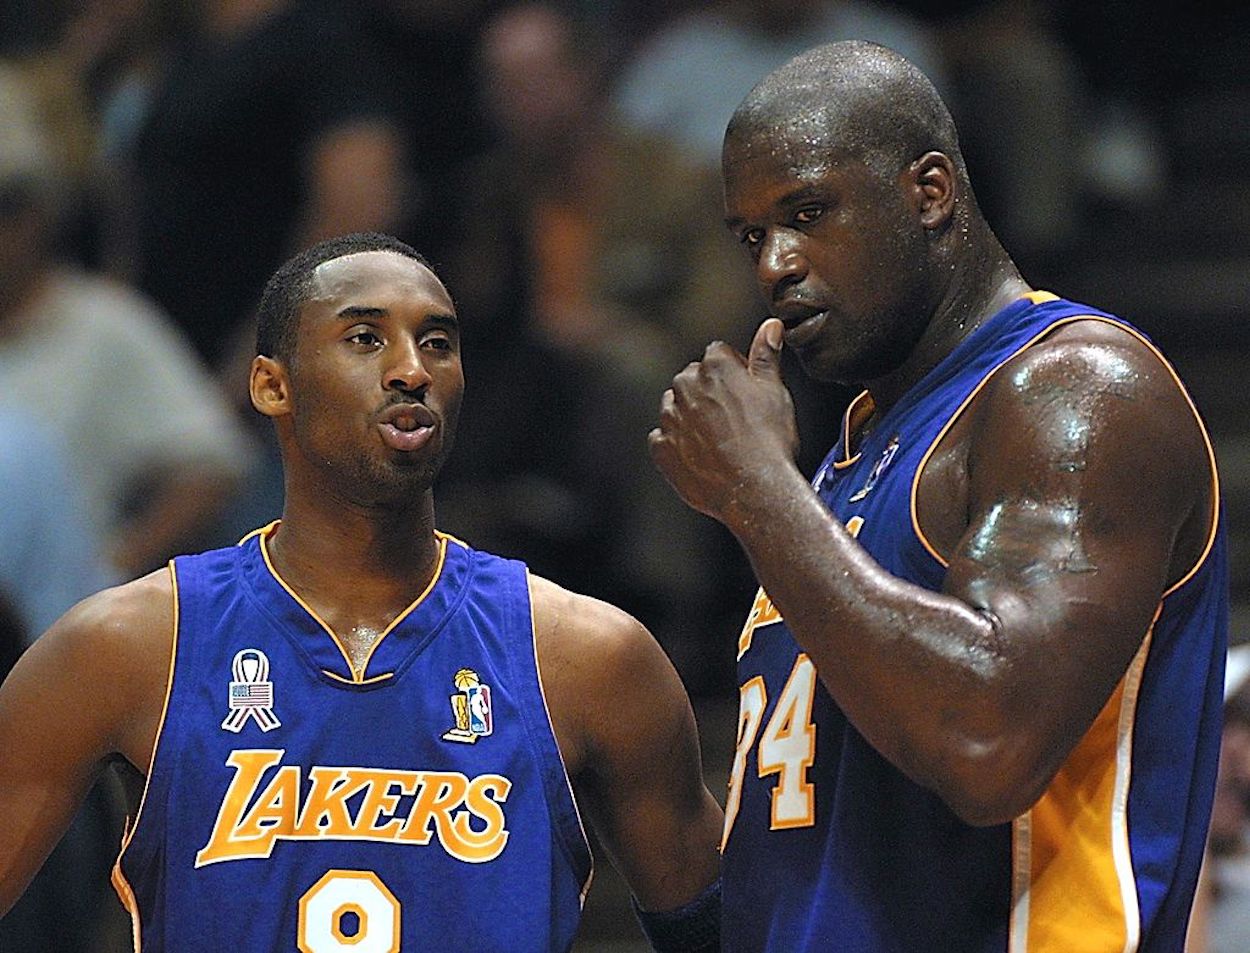 Lakers: Shaquille O'Neal was the most dominant player ever